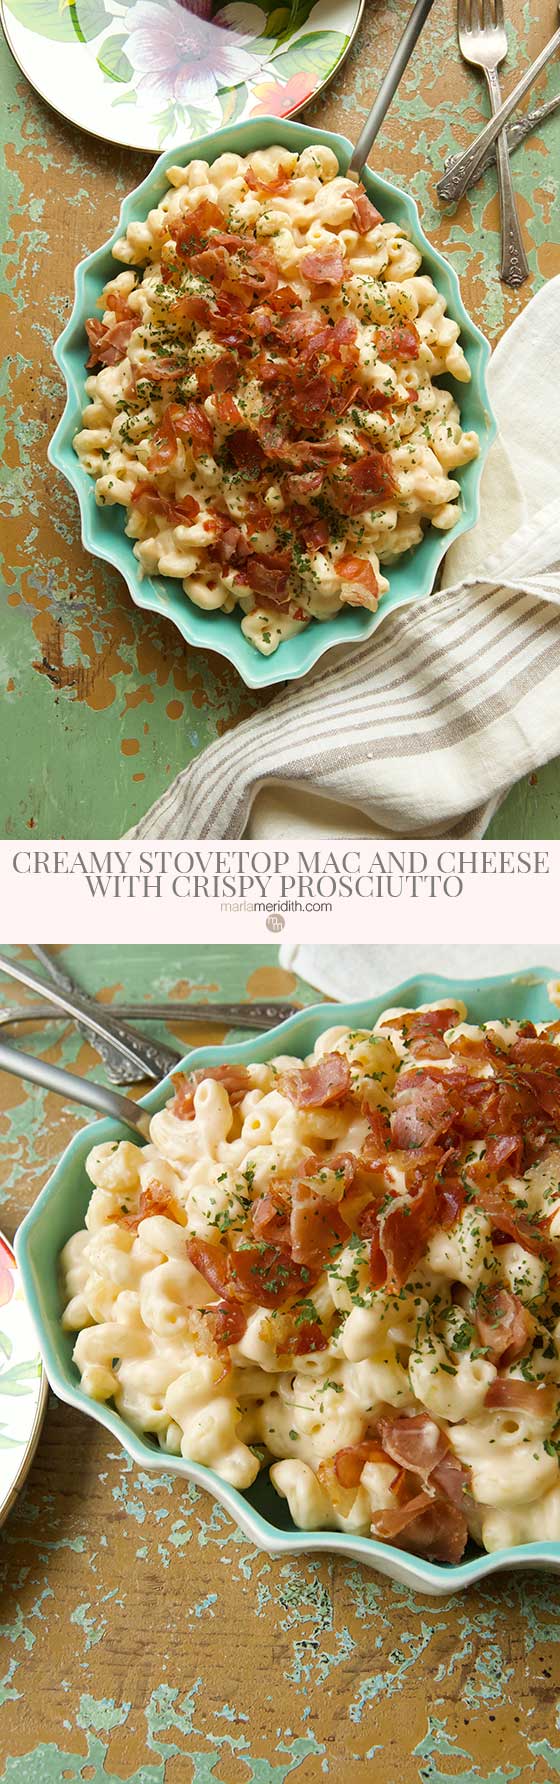 Do you love mac and cheese? Well then this Creamy Stovetop Mac and Cheese with Crispy Prosciutto will become your go-to recipe! MarlaMeridith.com